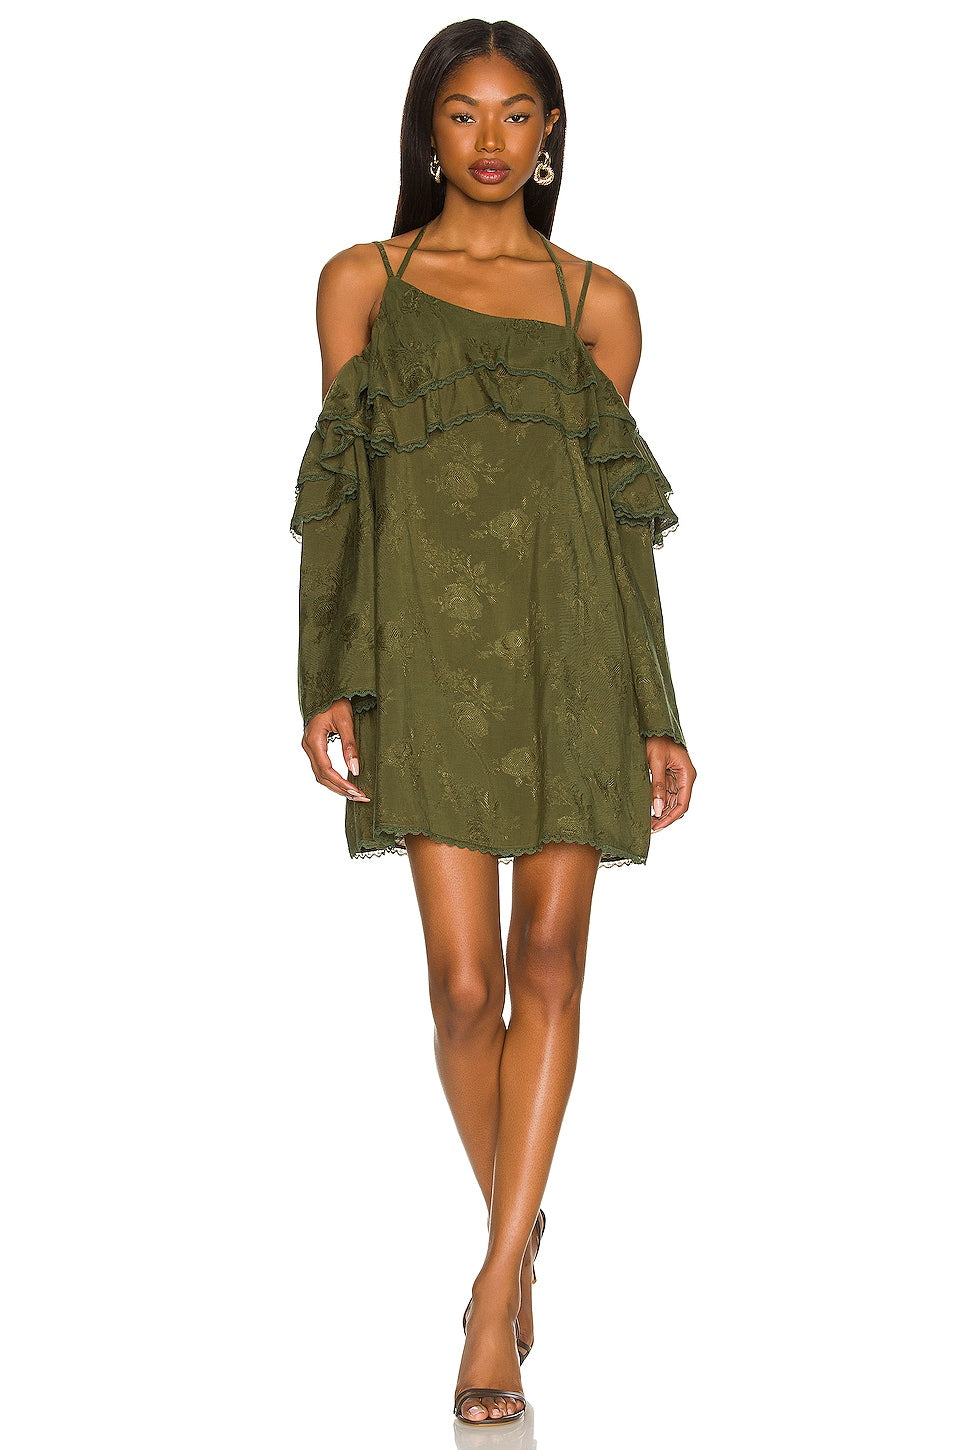 Marley Dress in OLIVE GREEN